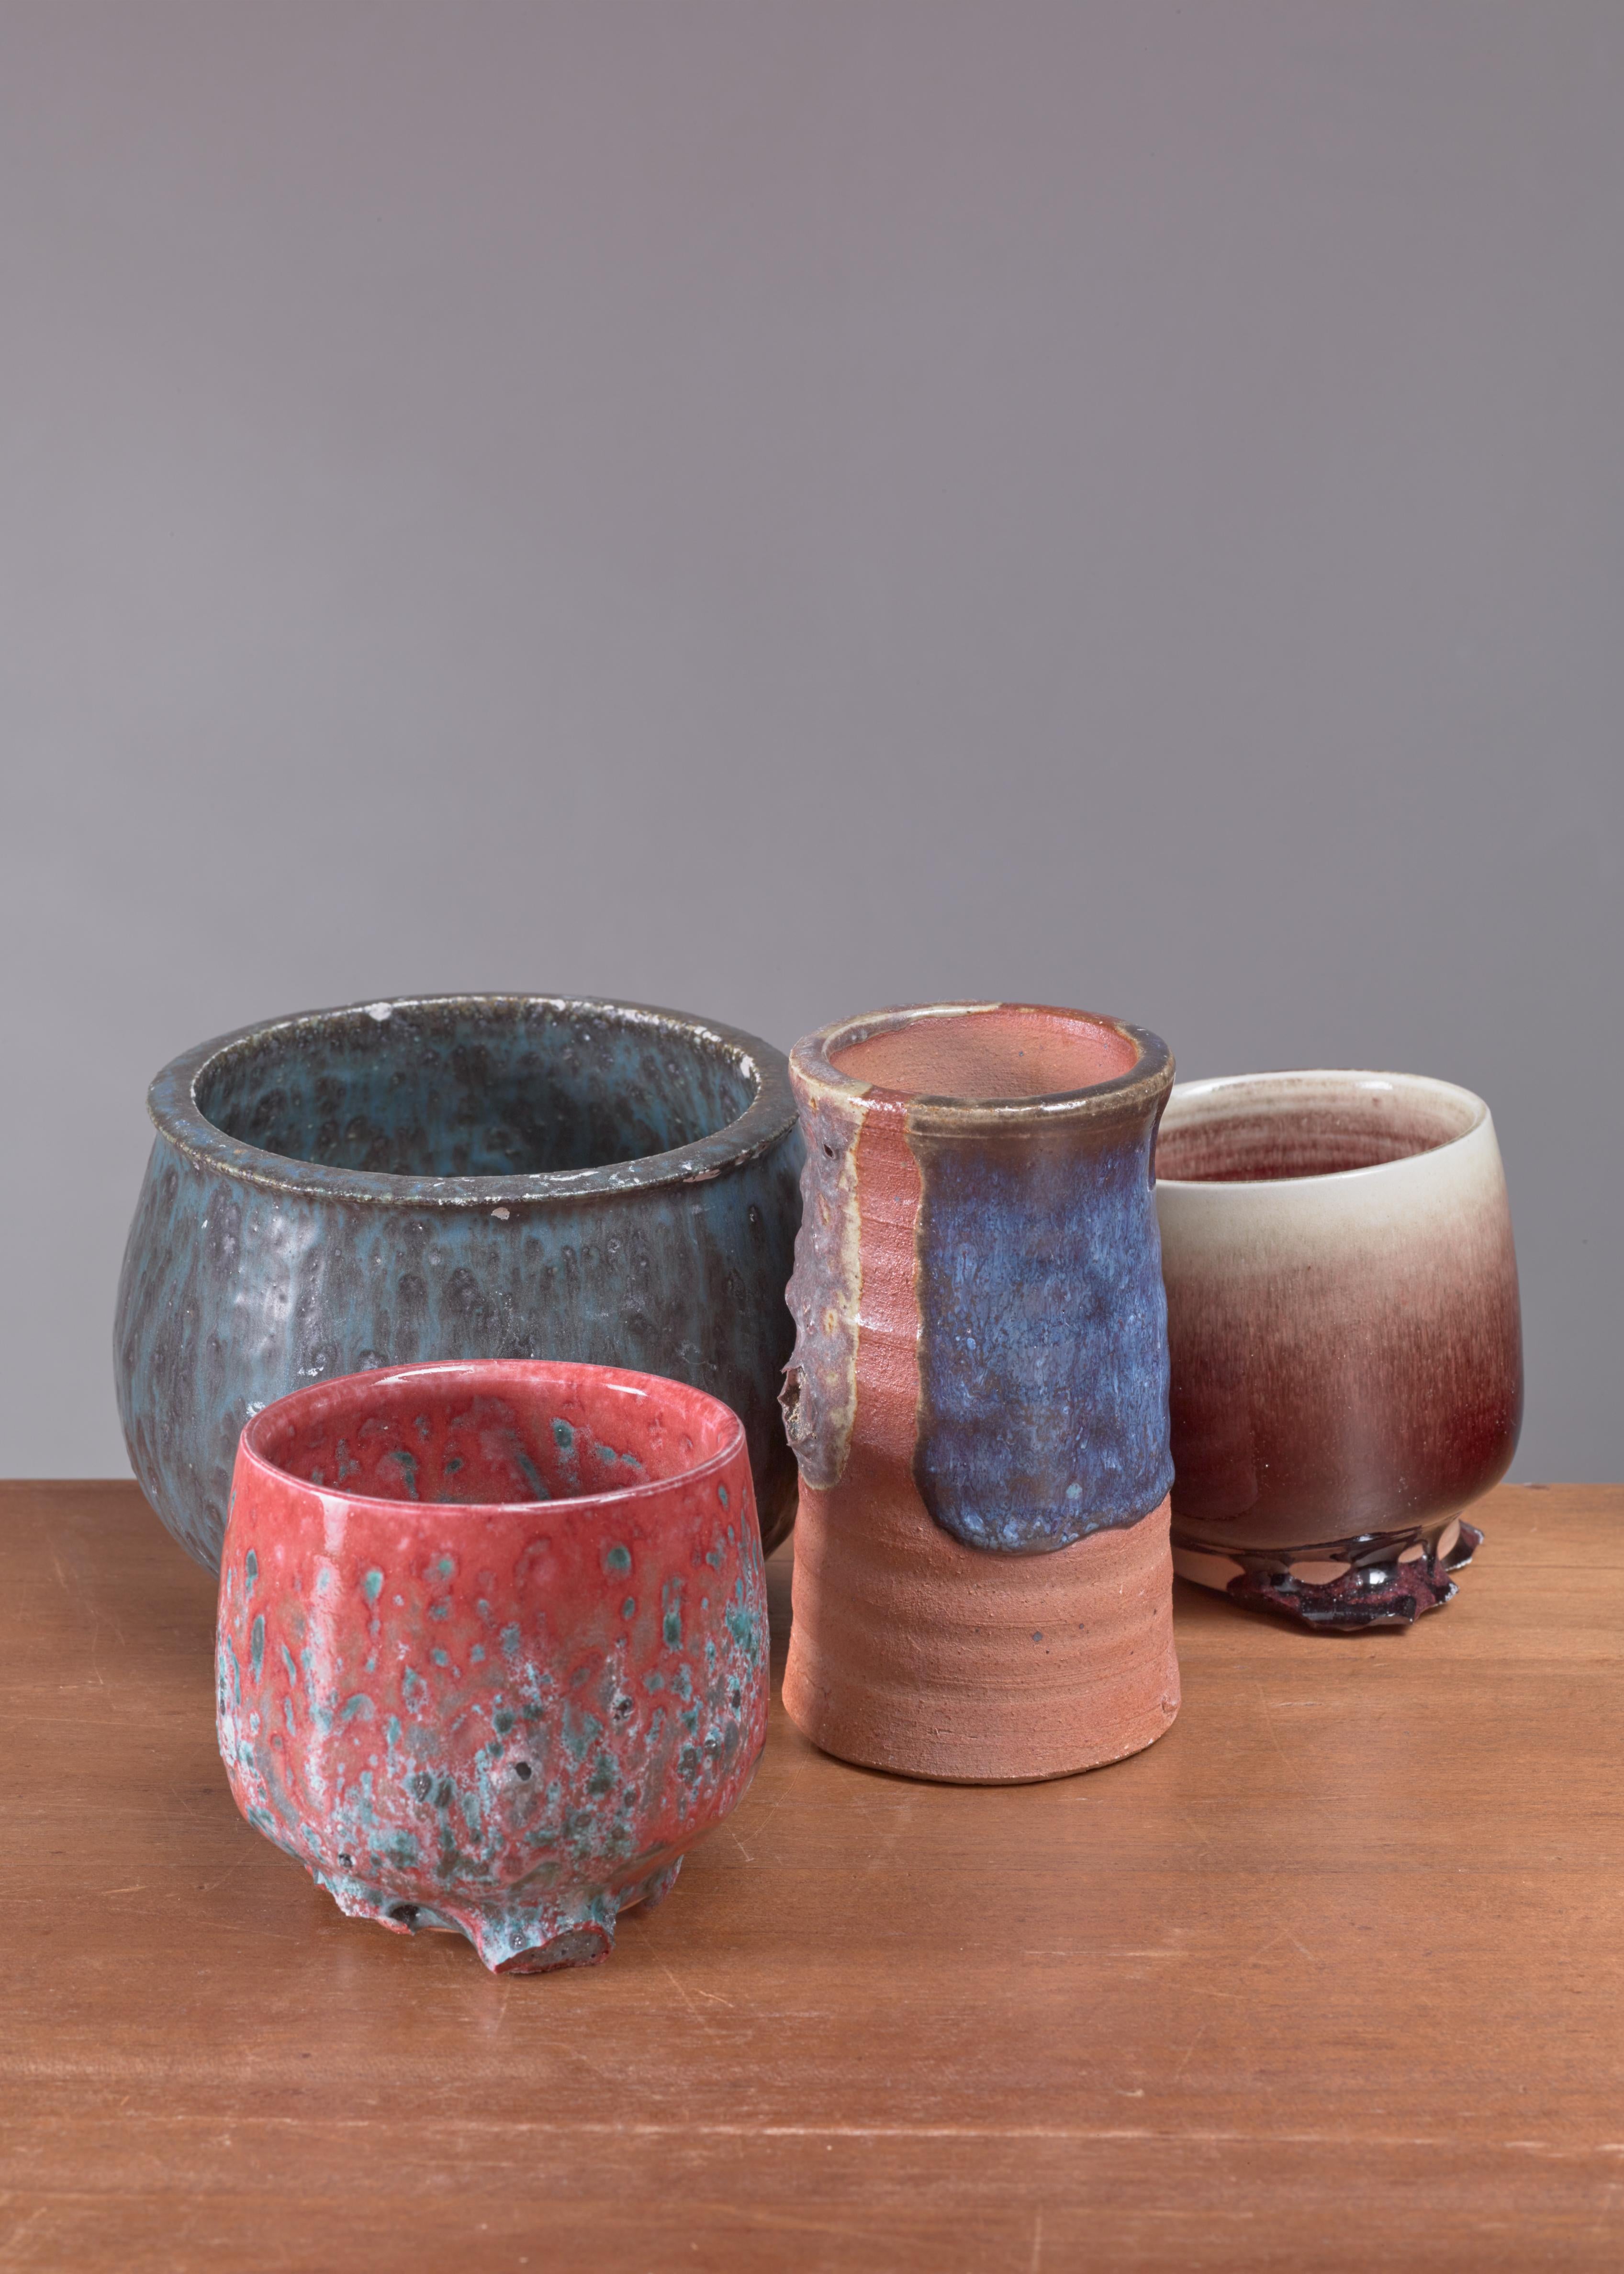 A set of four ceramic vases with a rough, multi-color glaze by Rolf Palm.
Measures: The smallest piece is 5.5 cm (2 inch) high and has a 10 cm (4 inch) diameter. The tallest piece is 11.5 cm (4.5 inch) high with a 15 cm (6 inch) diameter.

All